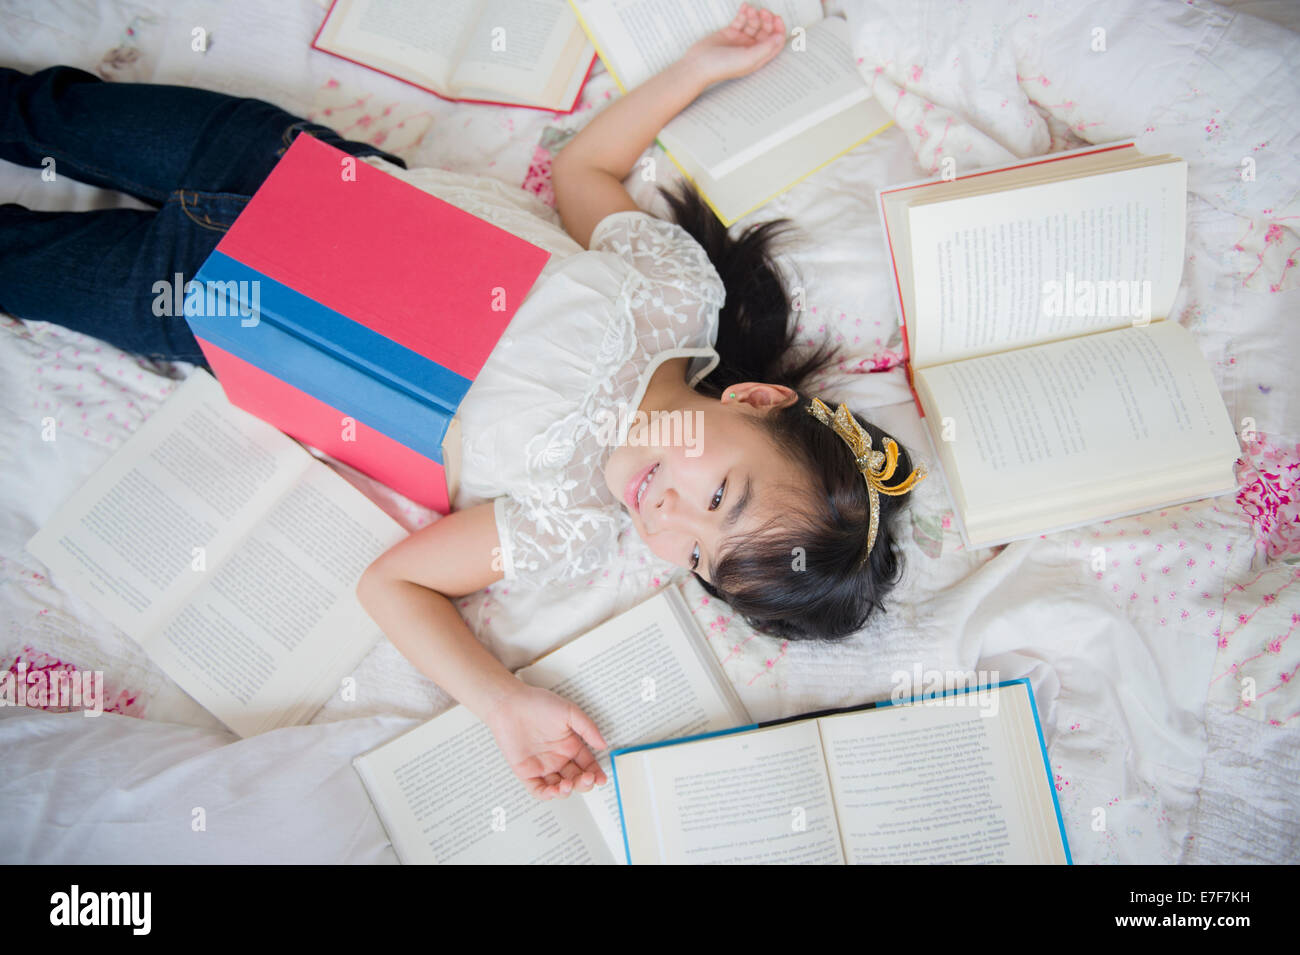 Filipino girl laying in bed with books Stock Photo